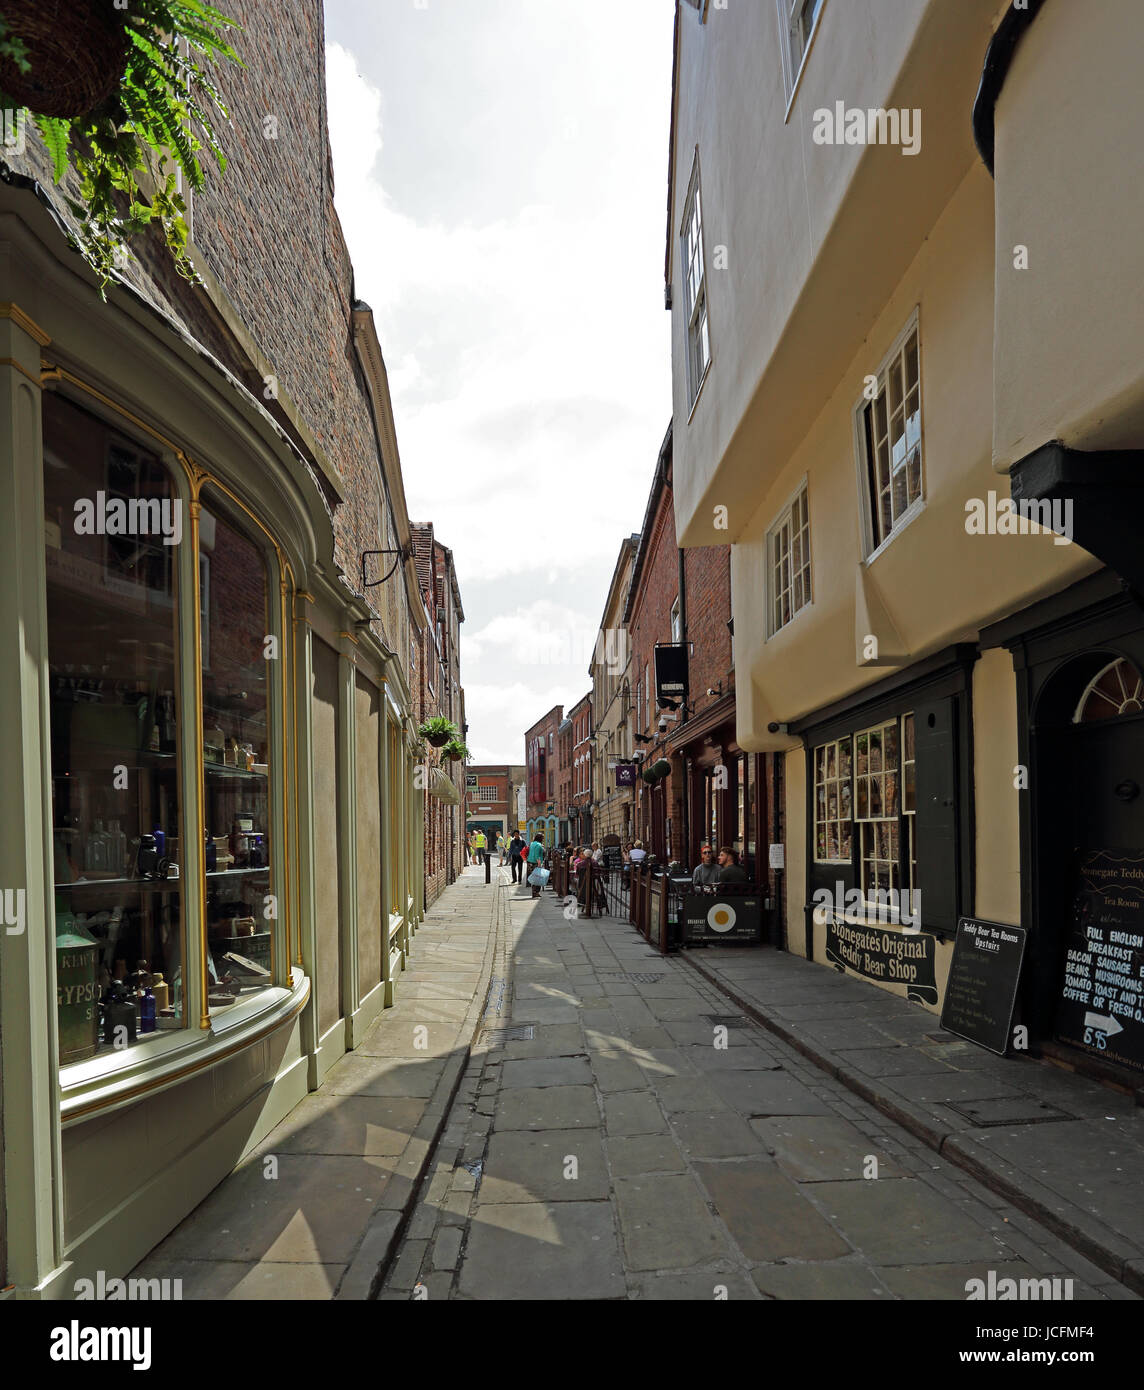 An old, paved street, Stonegate, in York, England, UK. Stock Photo